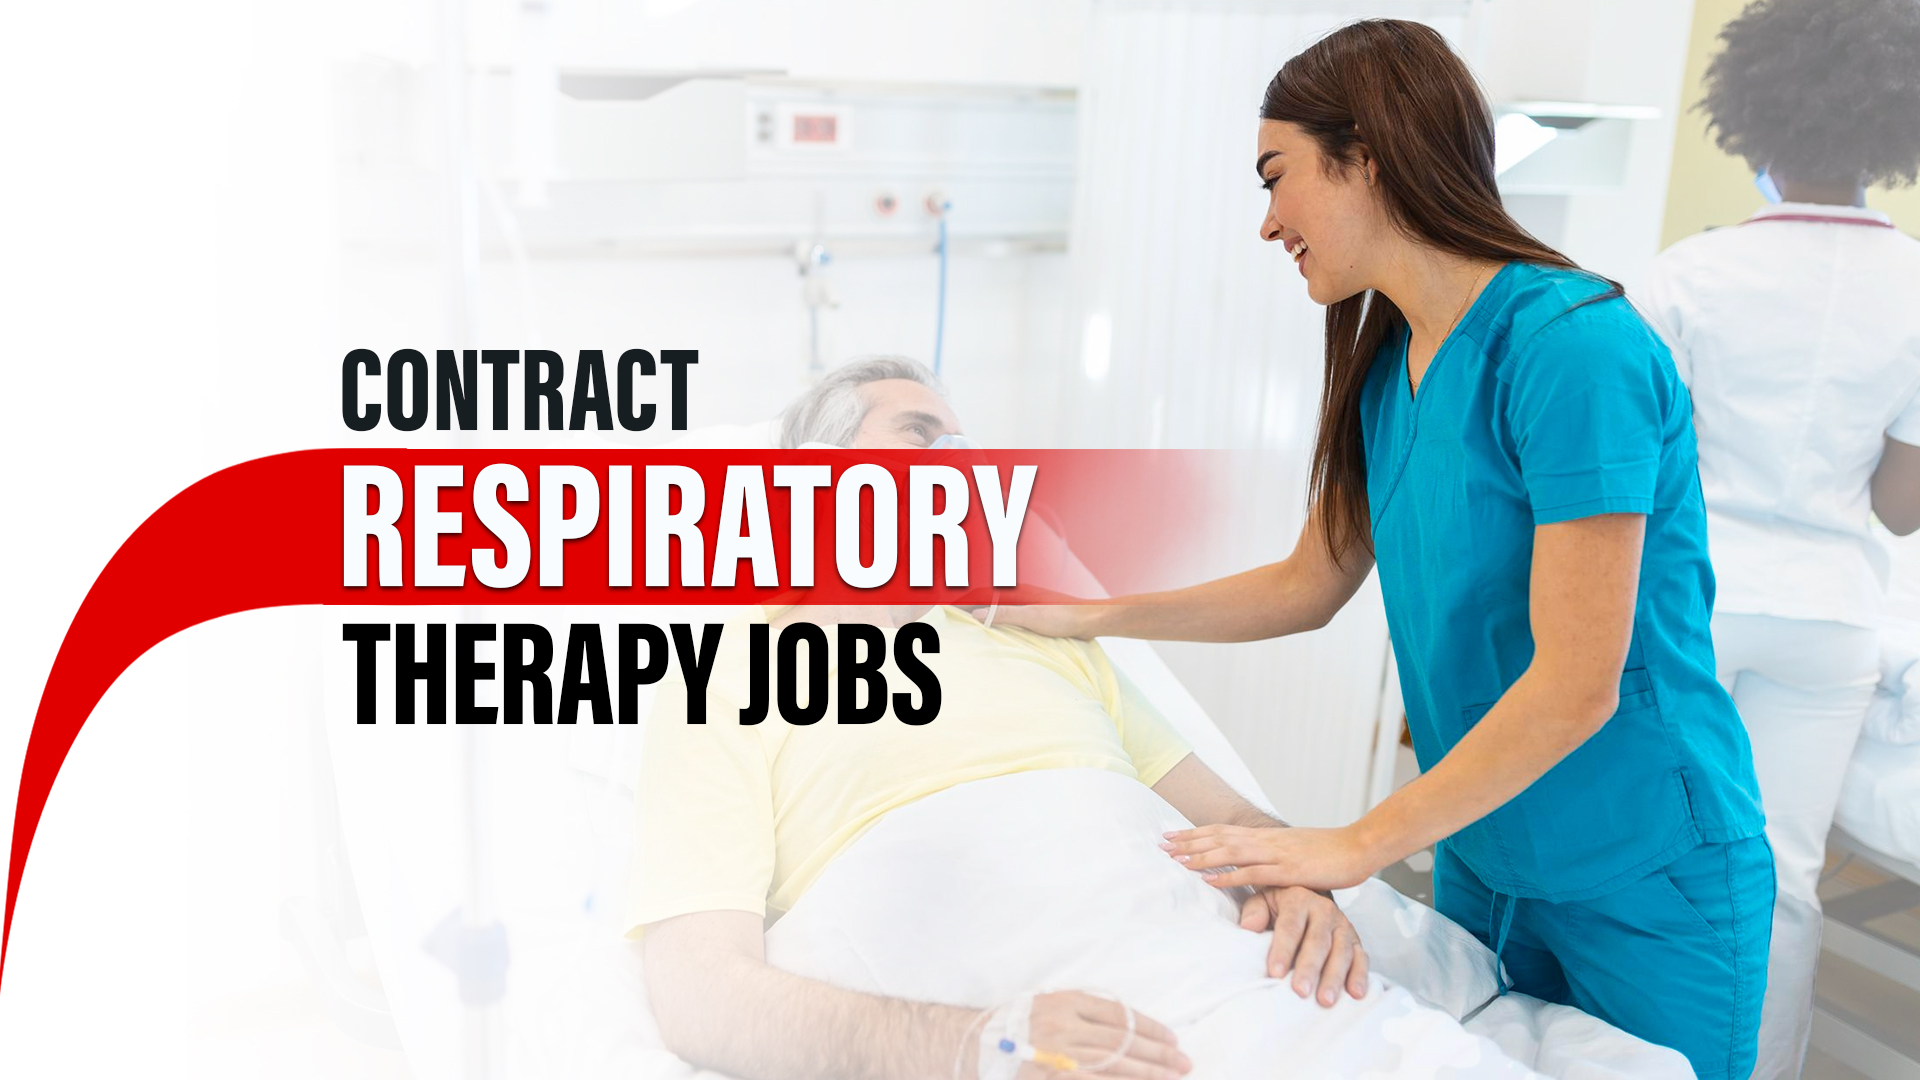 1710933970_Contract Respiratory Therapy Jobs.jpg